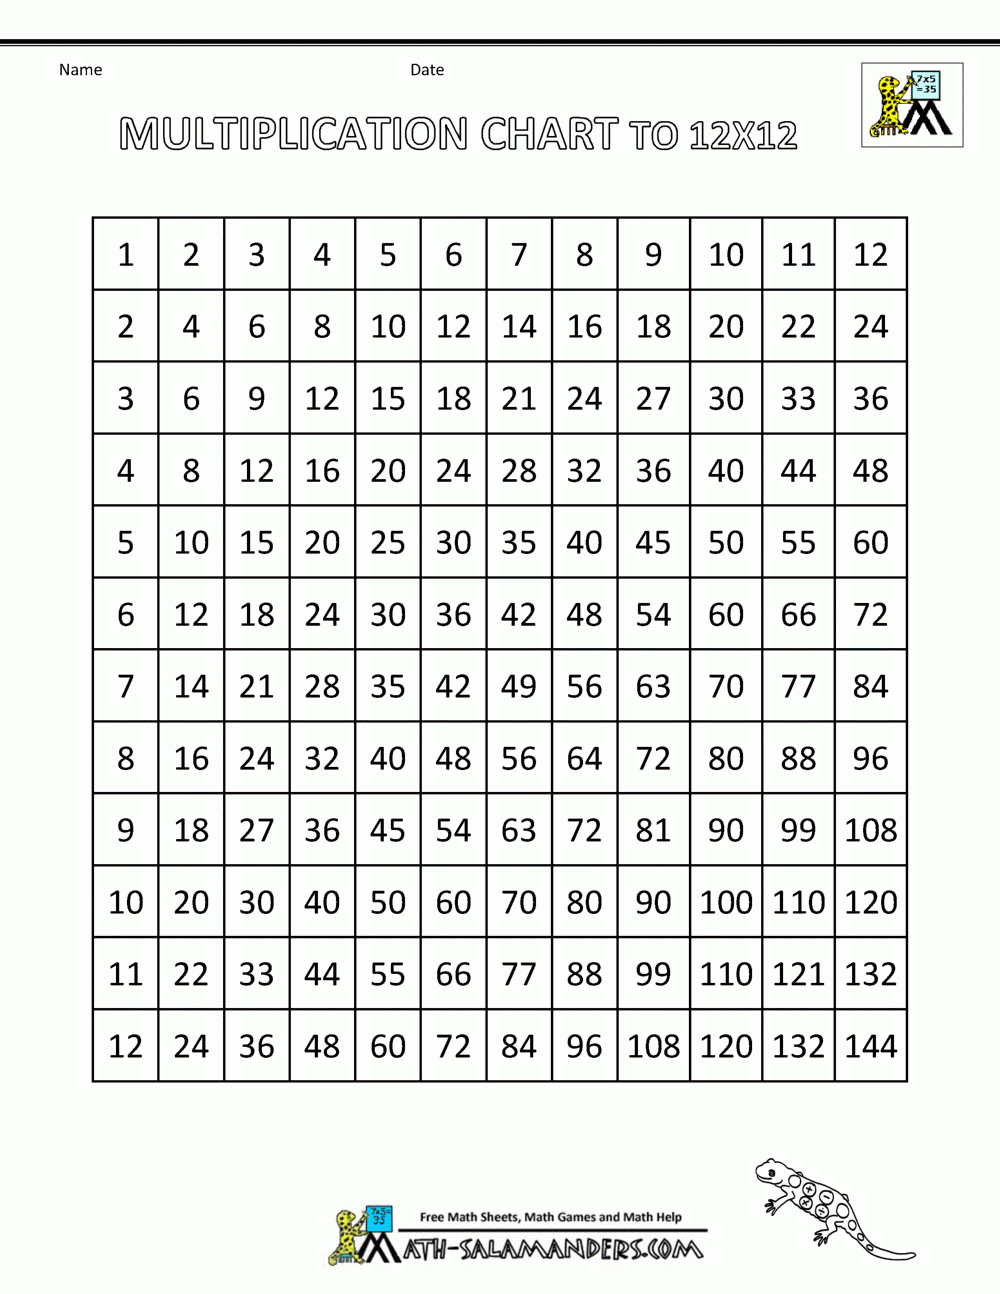 Times Table Grid To 12X12 in Printable Multiplication Table Of 12